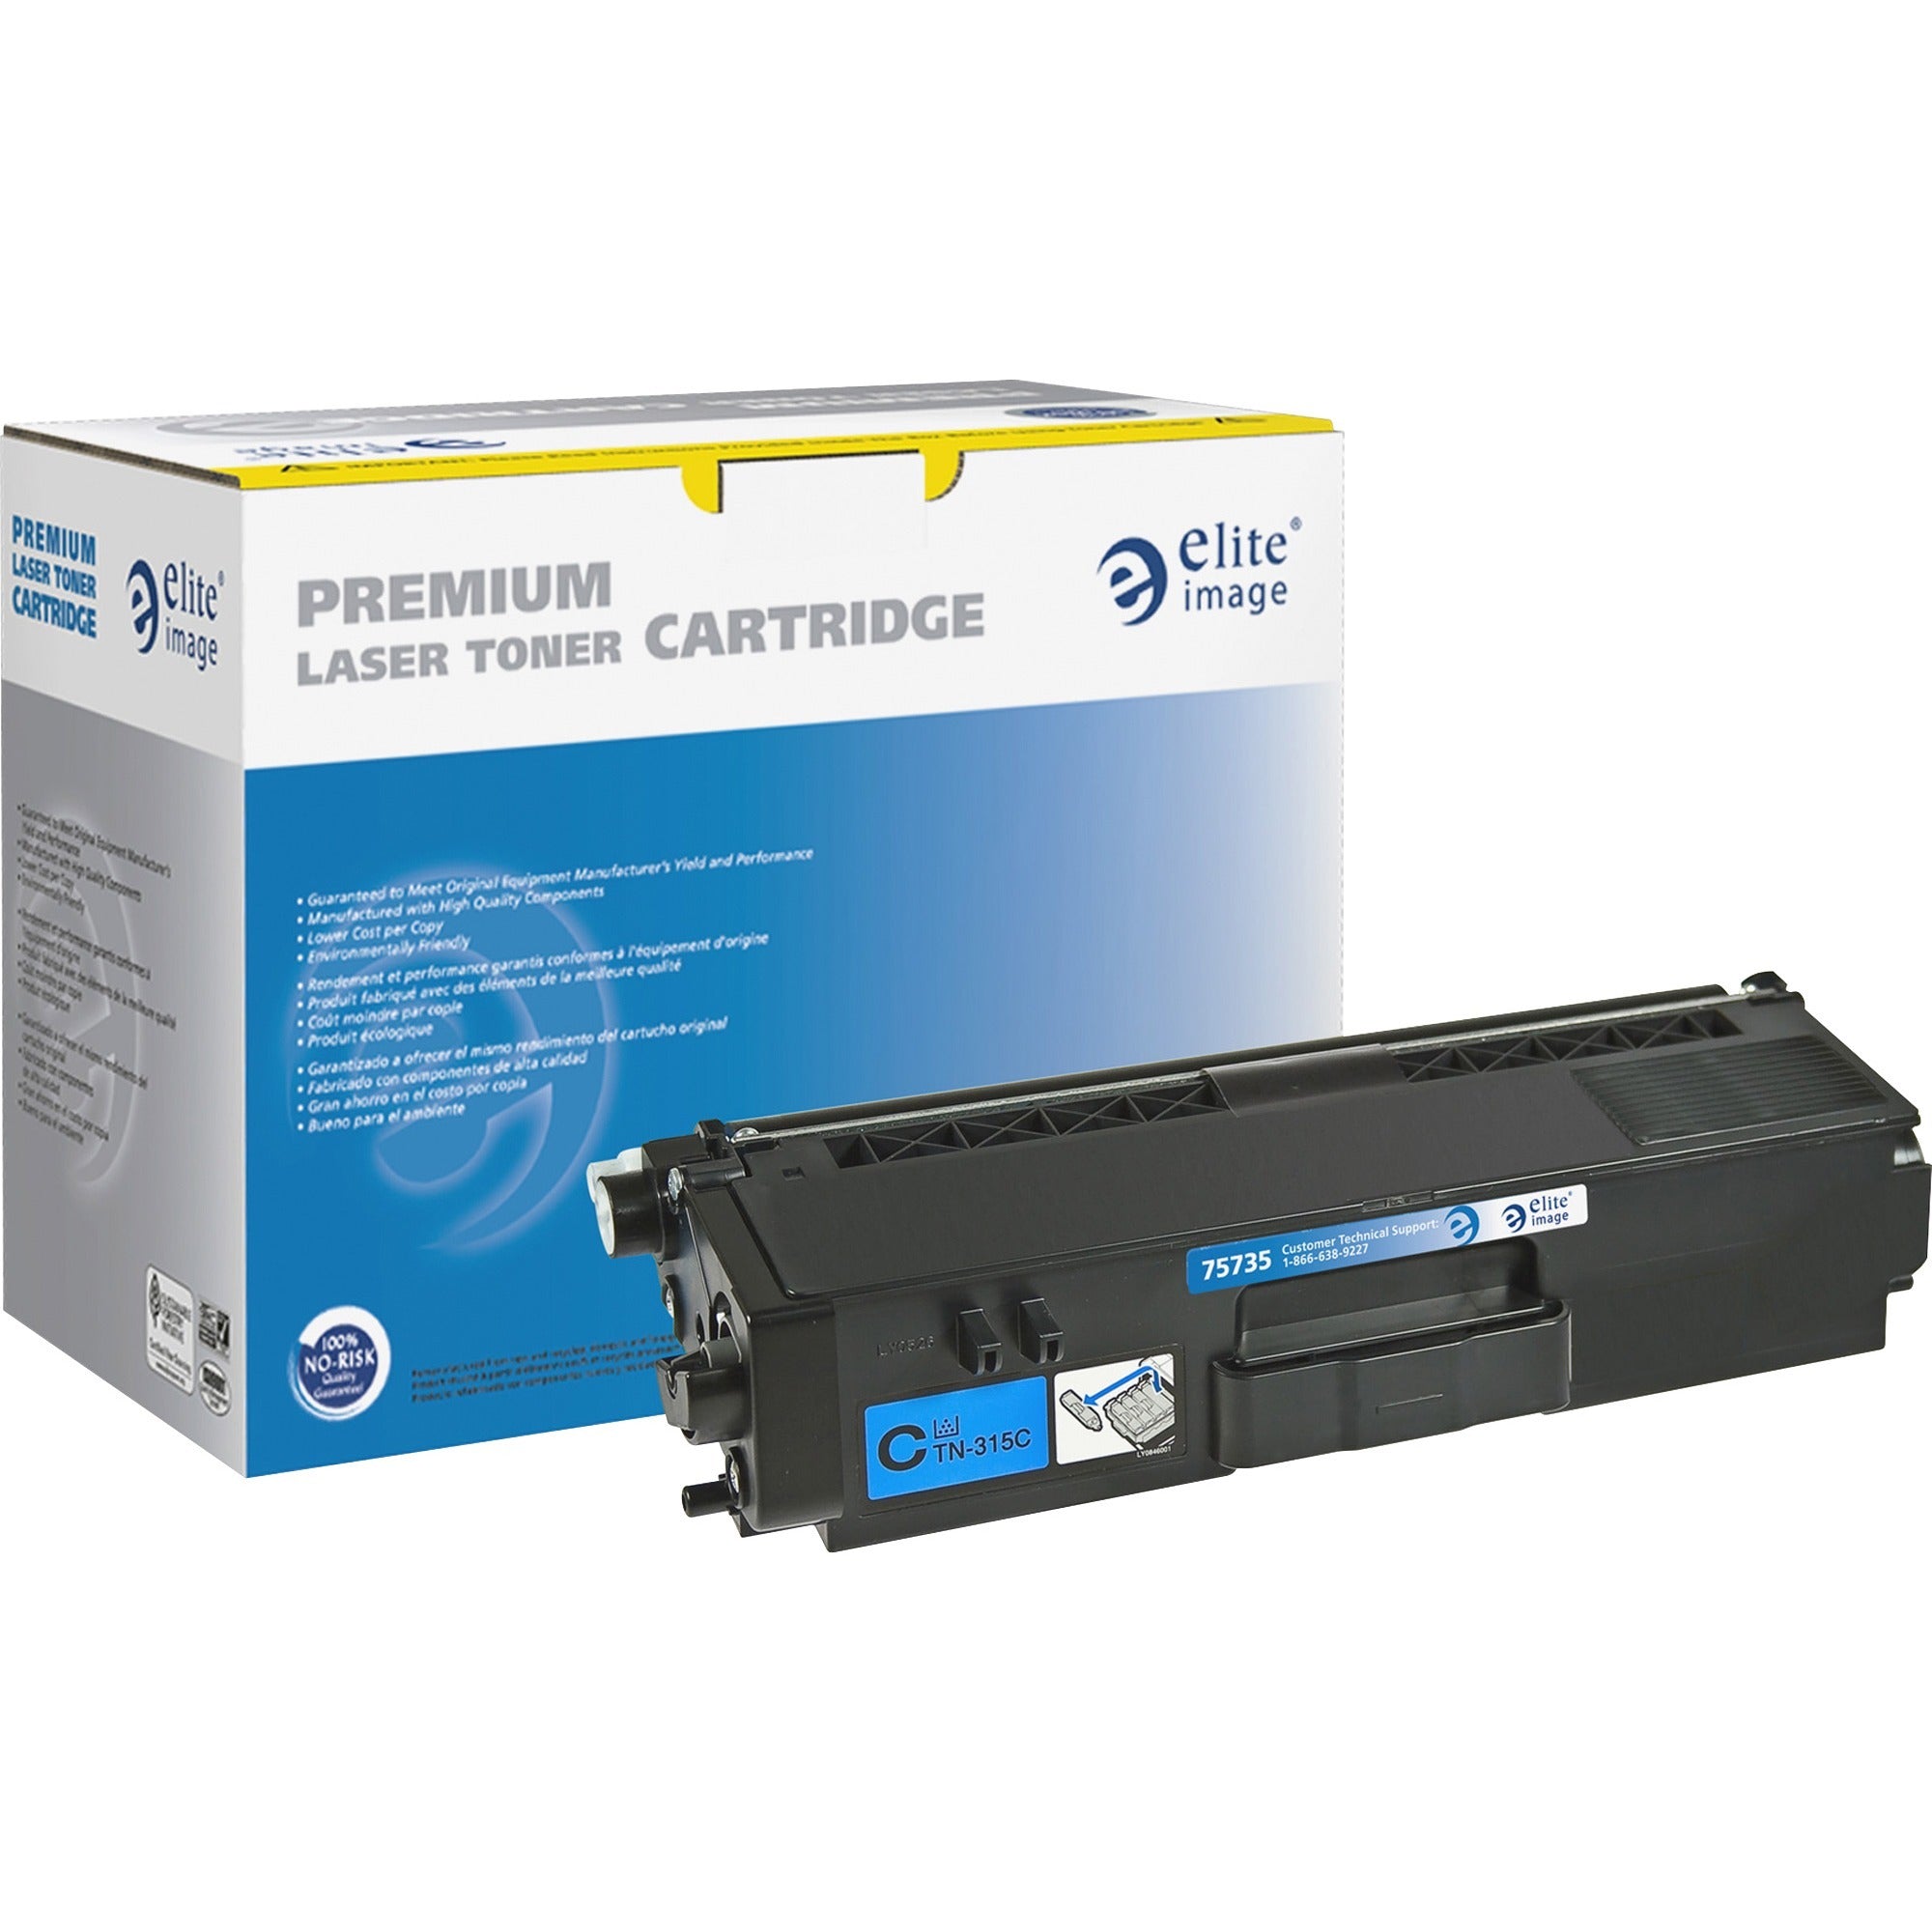 Elite Image Remanufactured High Yield Laser Toner Cartridge - Alternative for Brother TN315 - Cyan - 1 Each - 3500 Pages